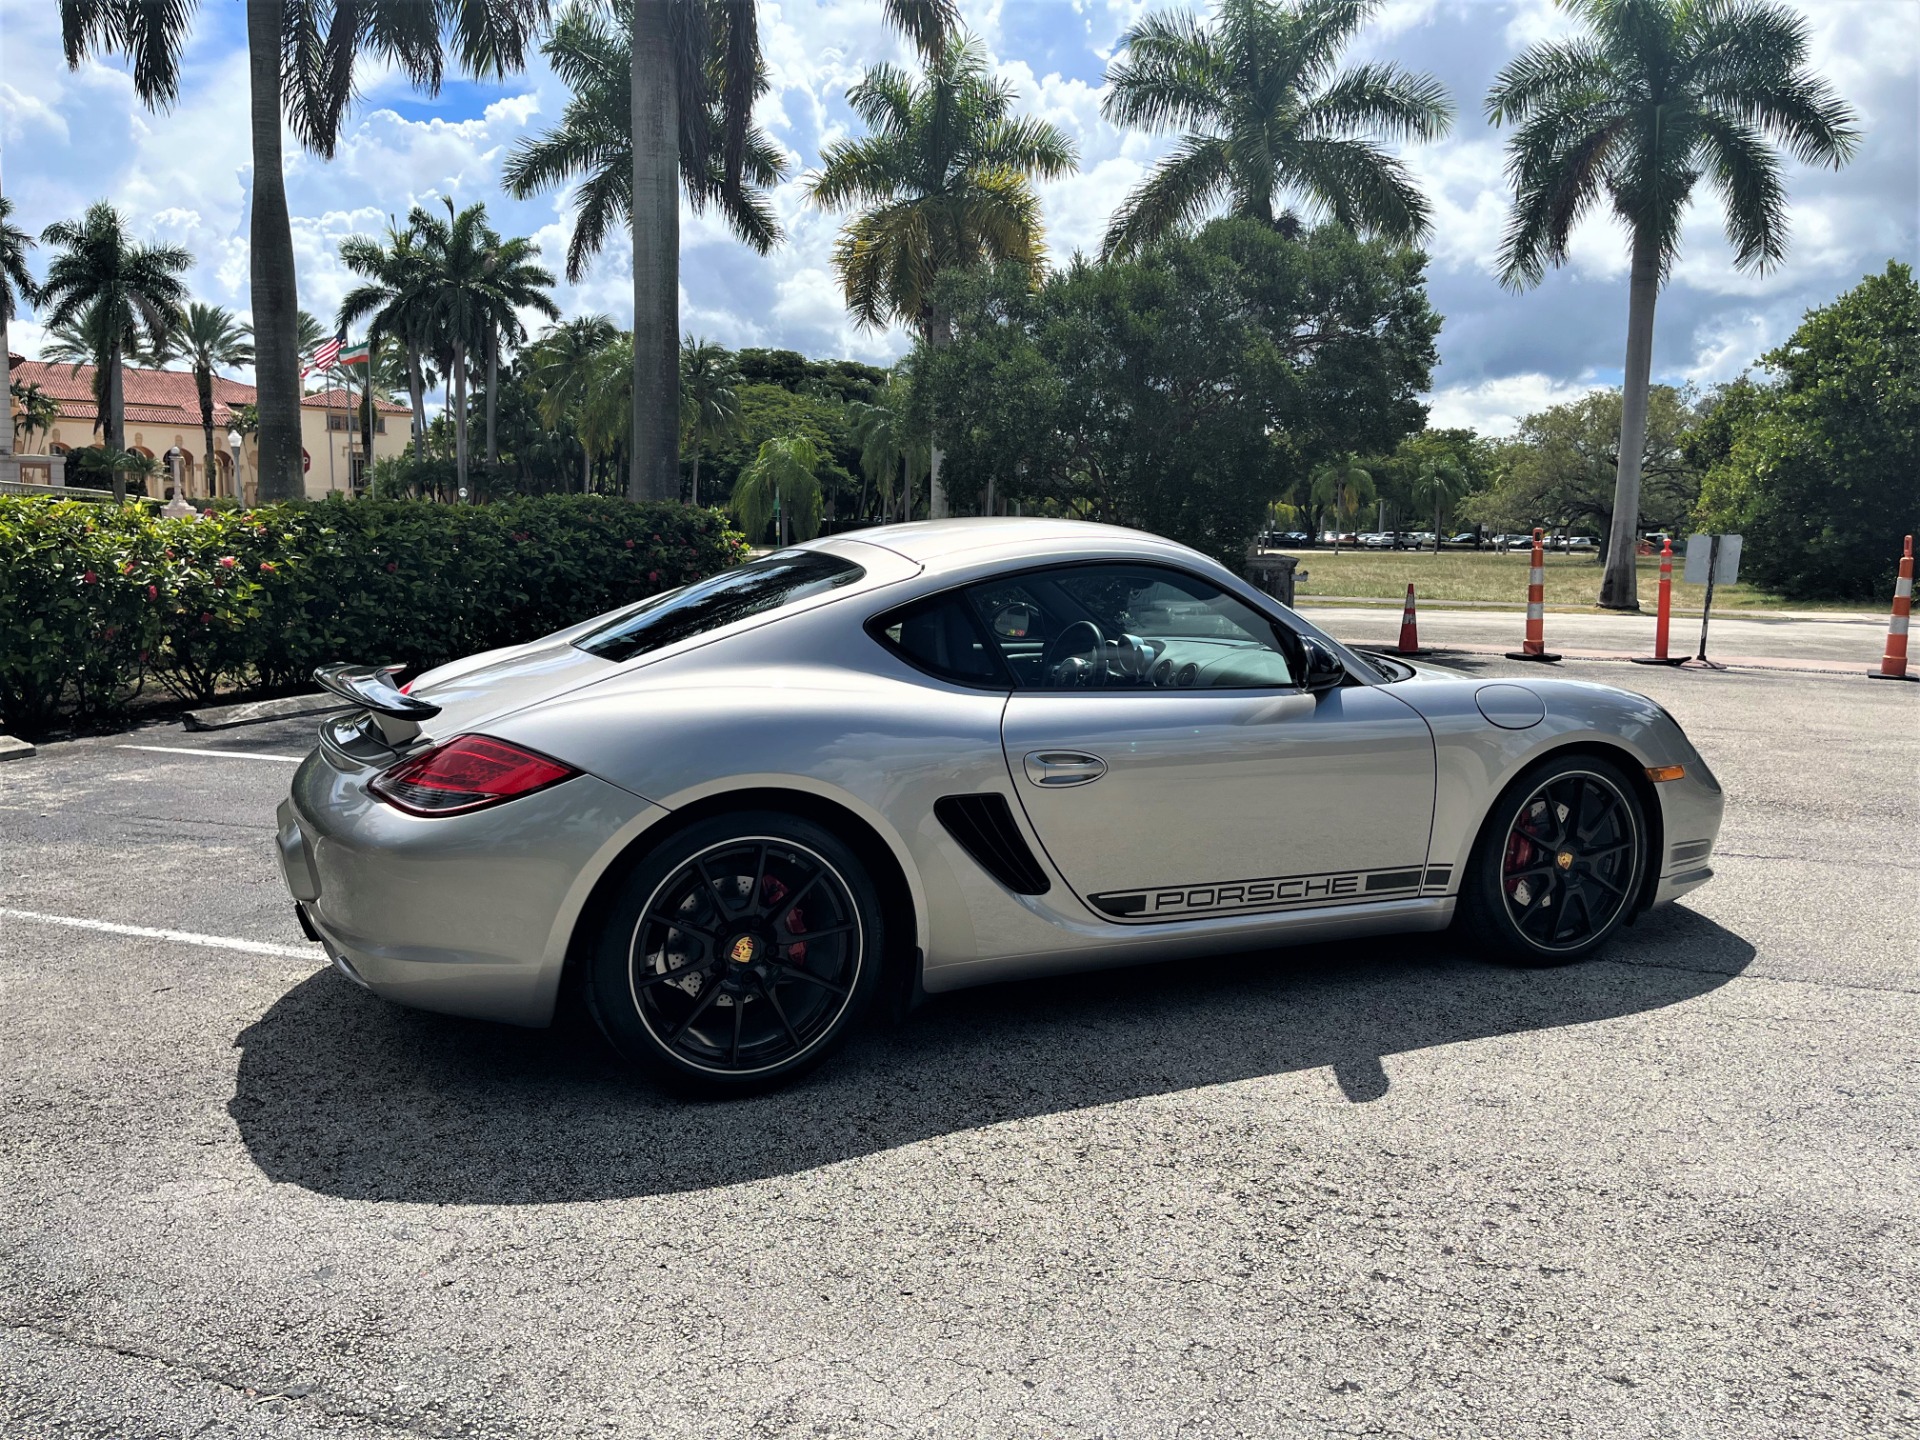 Used 2012 Porsche Cayman R for sale Sold at The Gables Sports Cars in Miami FL 33146 4